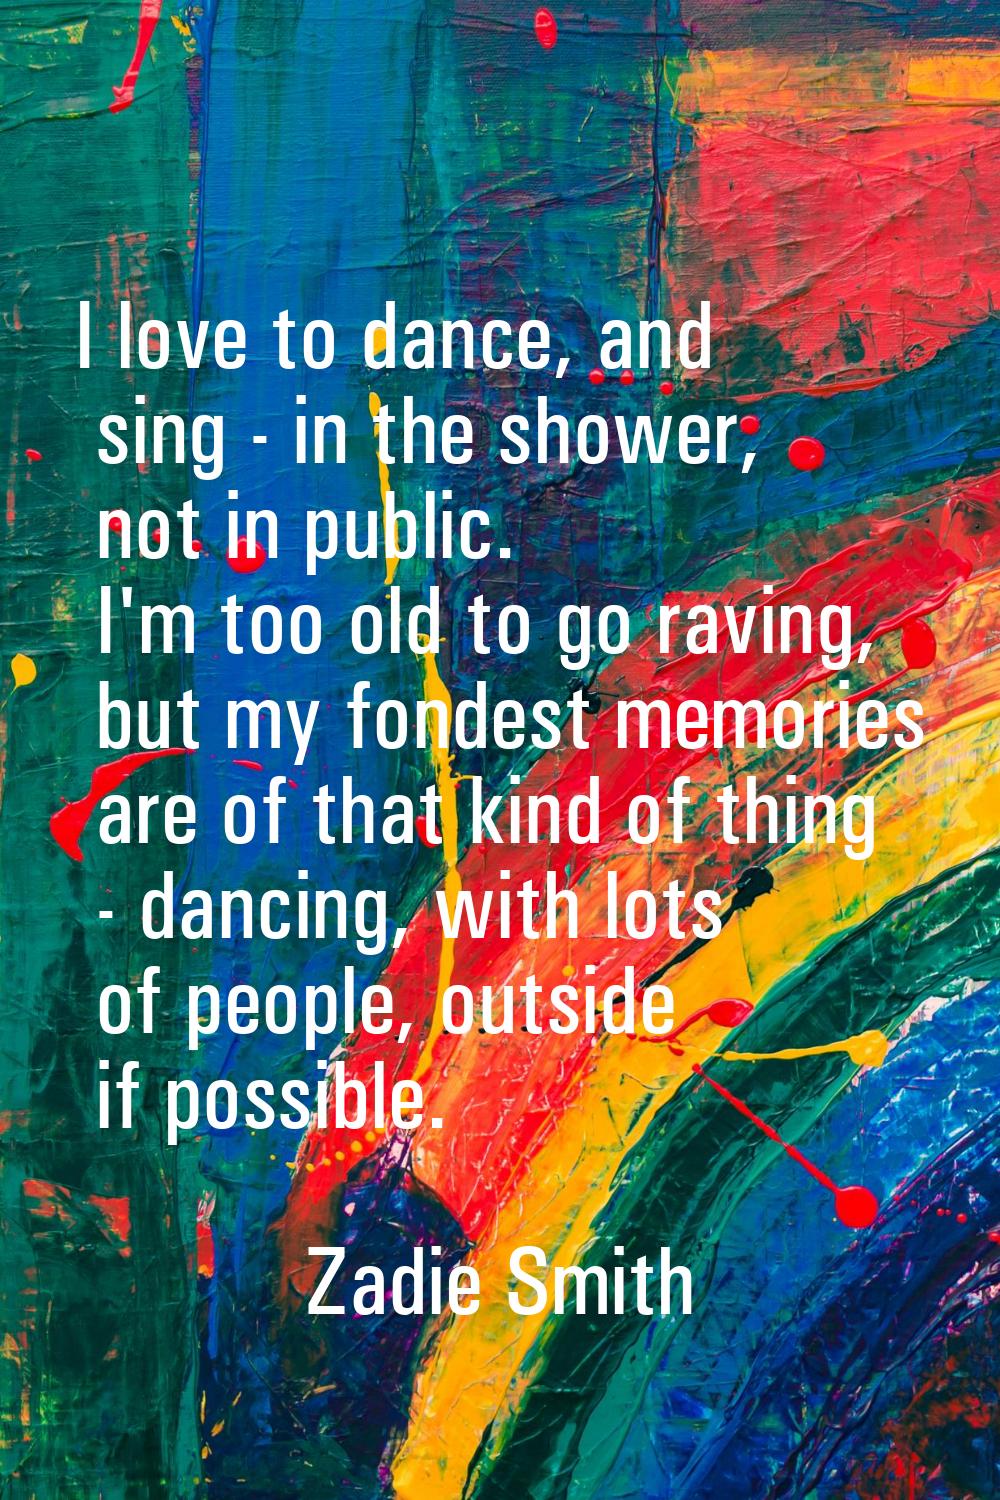 I love to dance, and sing - in the shower, not in public. I'm too old to go raving, but my fondest 